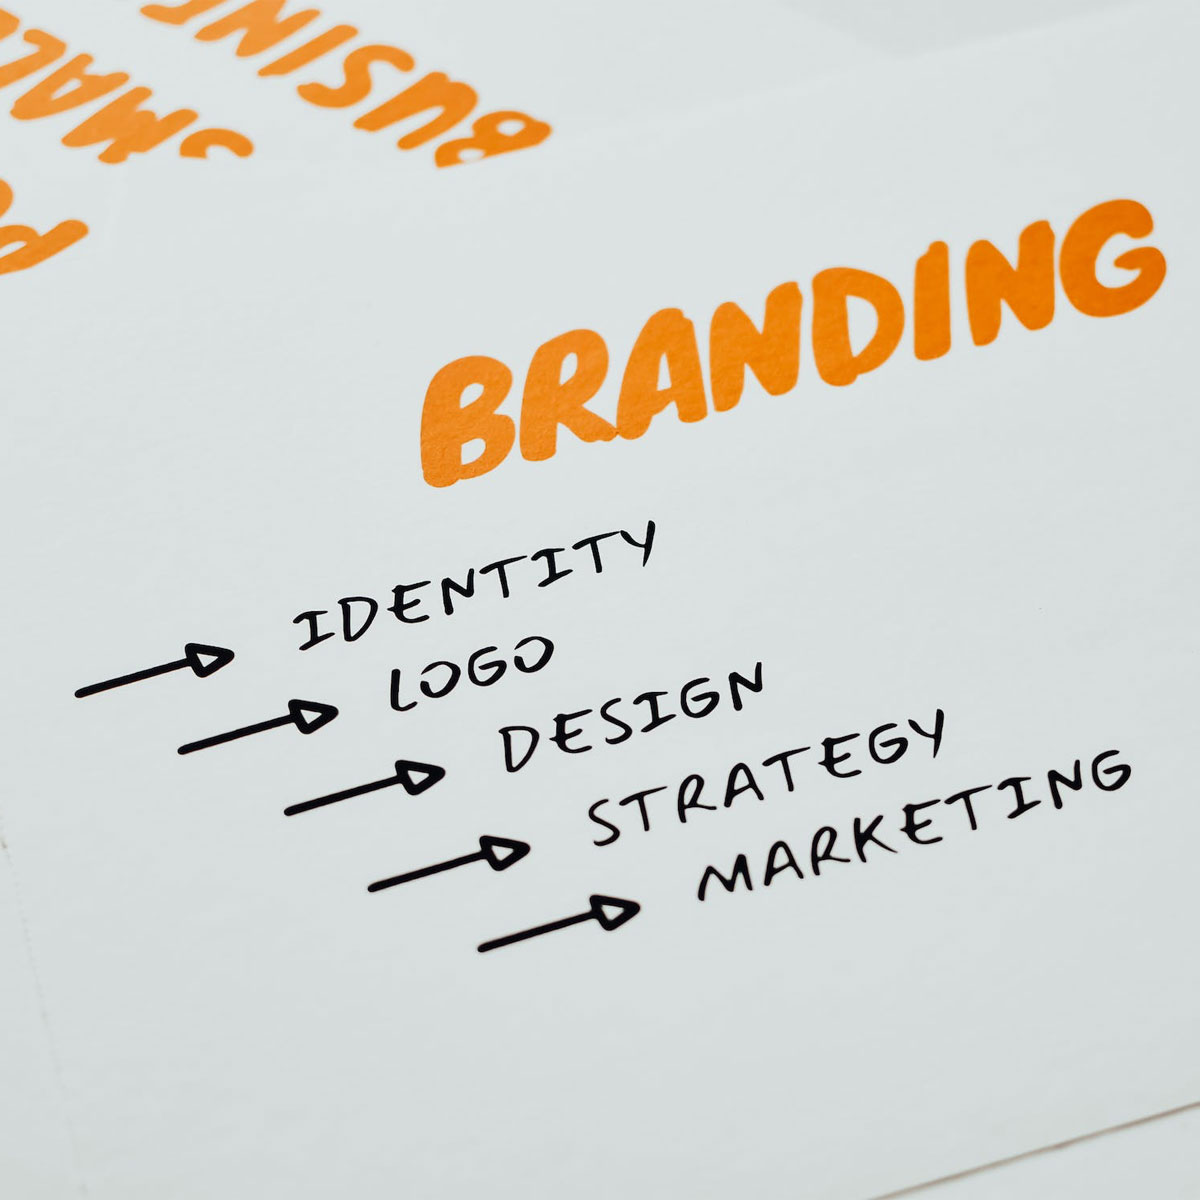 The difference between personal brand on social media and branding